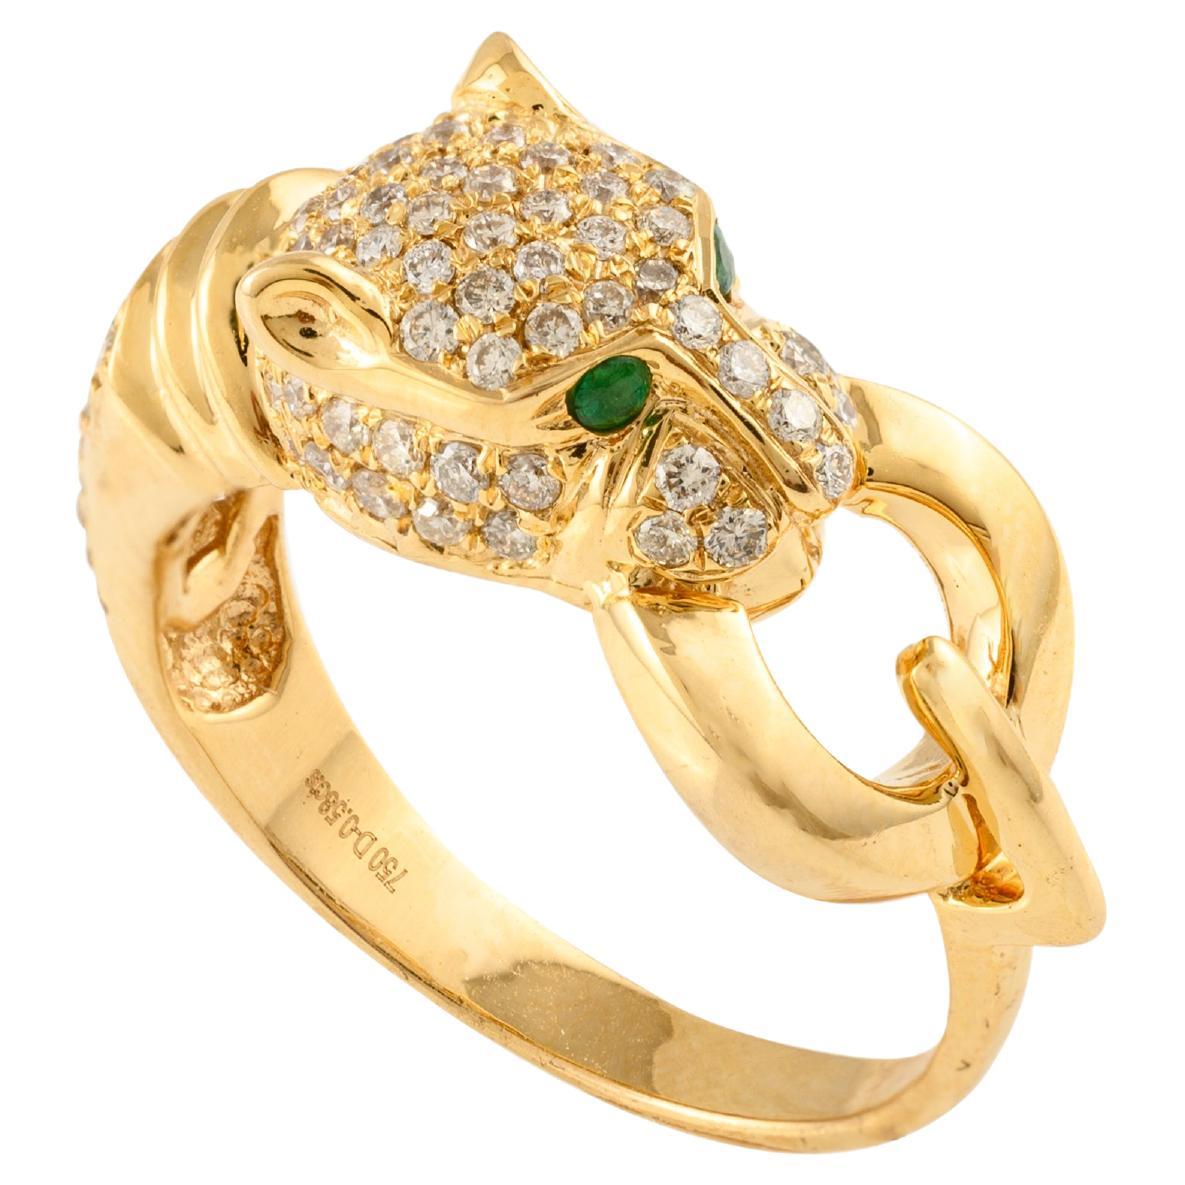 For Sale:  Diamond Studded Panther Head Ring with Emerald in 18k Solid Yellow Gold